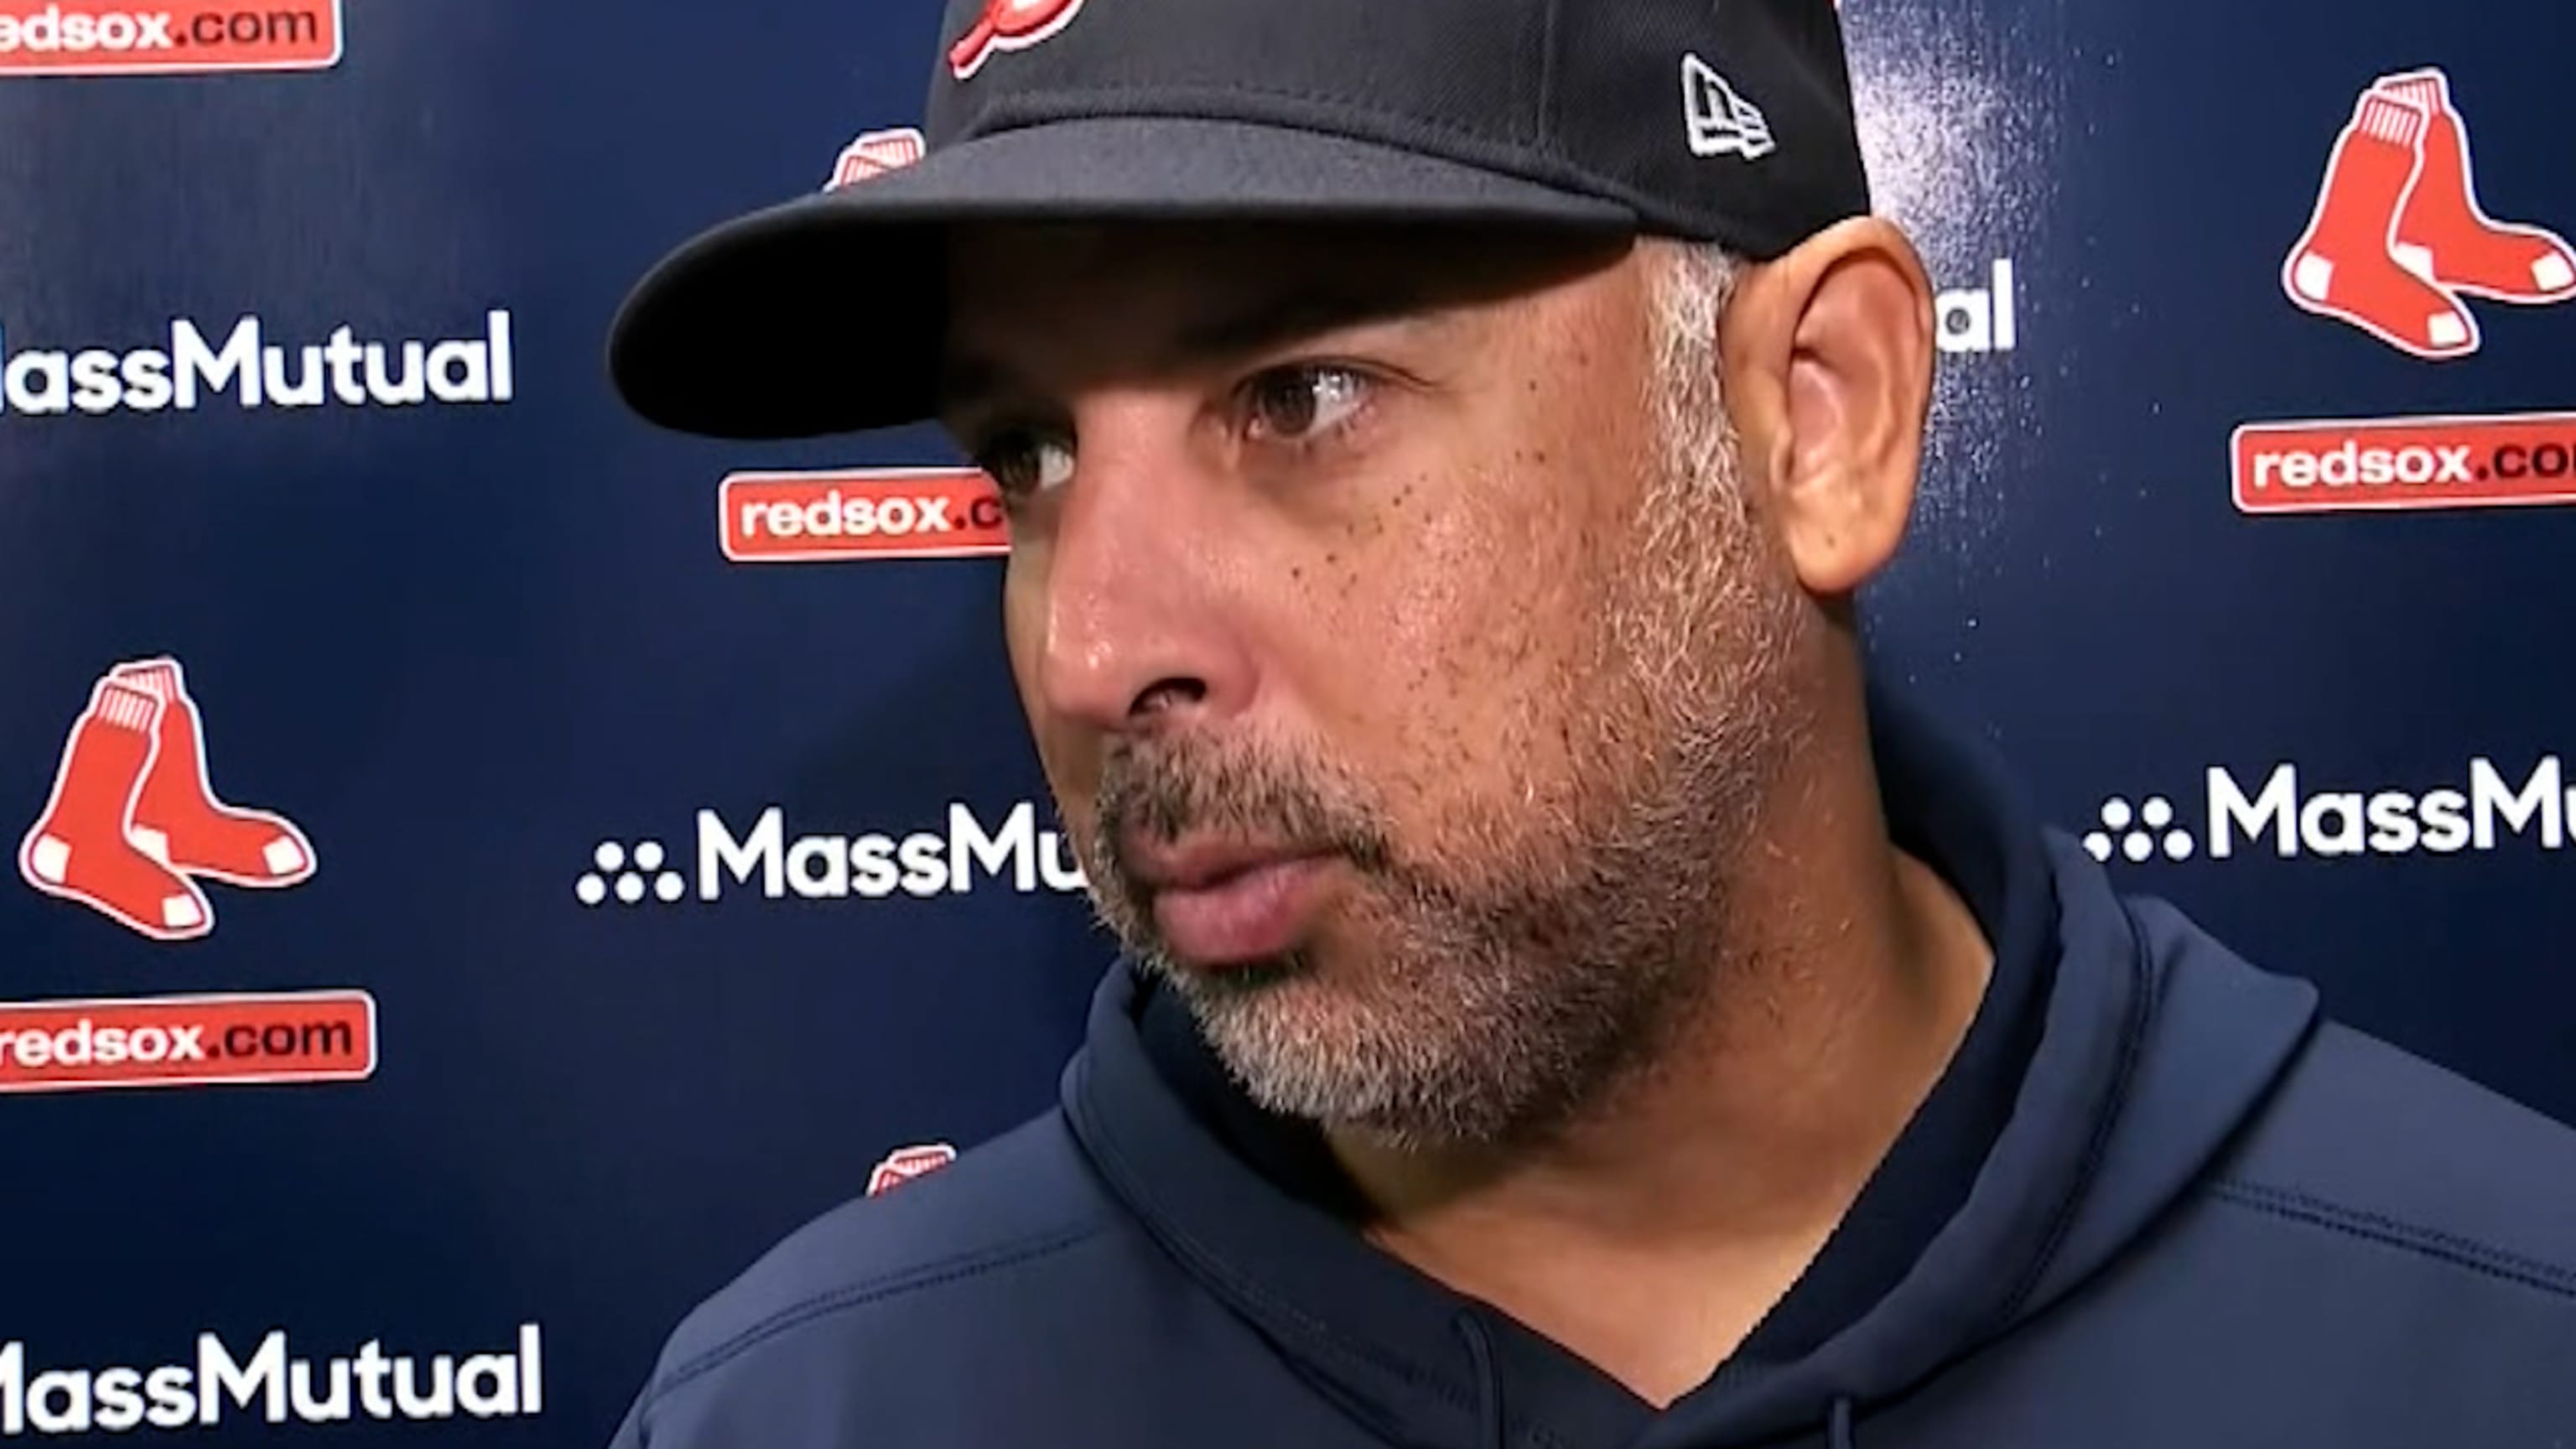 Alex Cora reveals the story behind his new beard